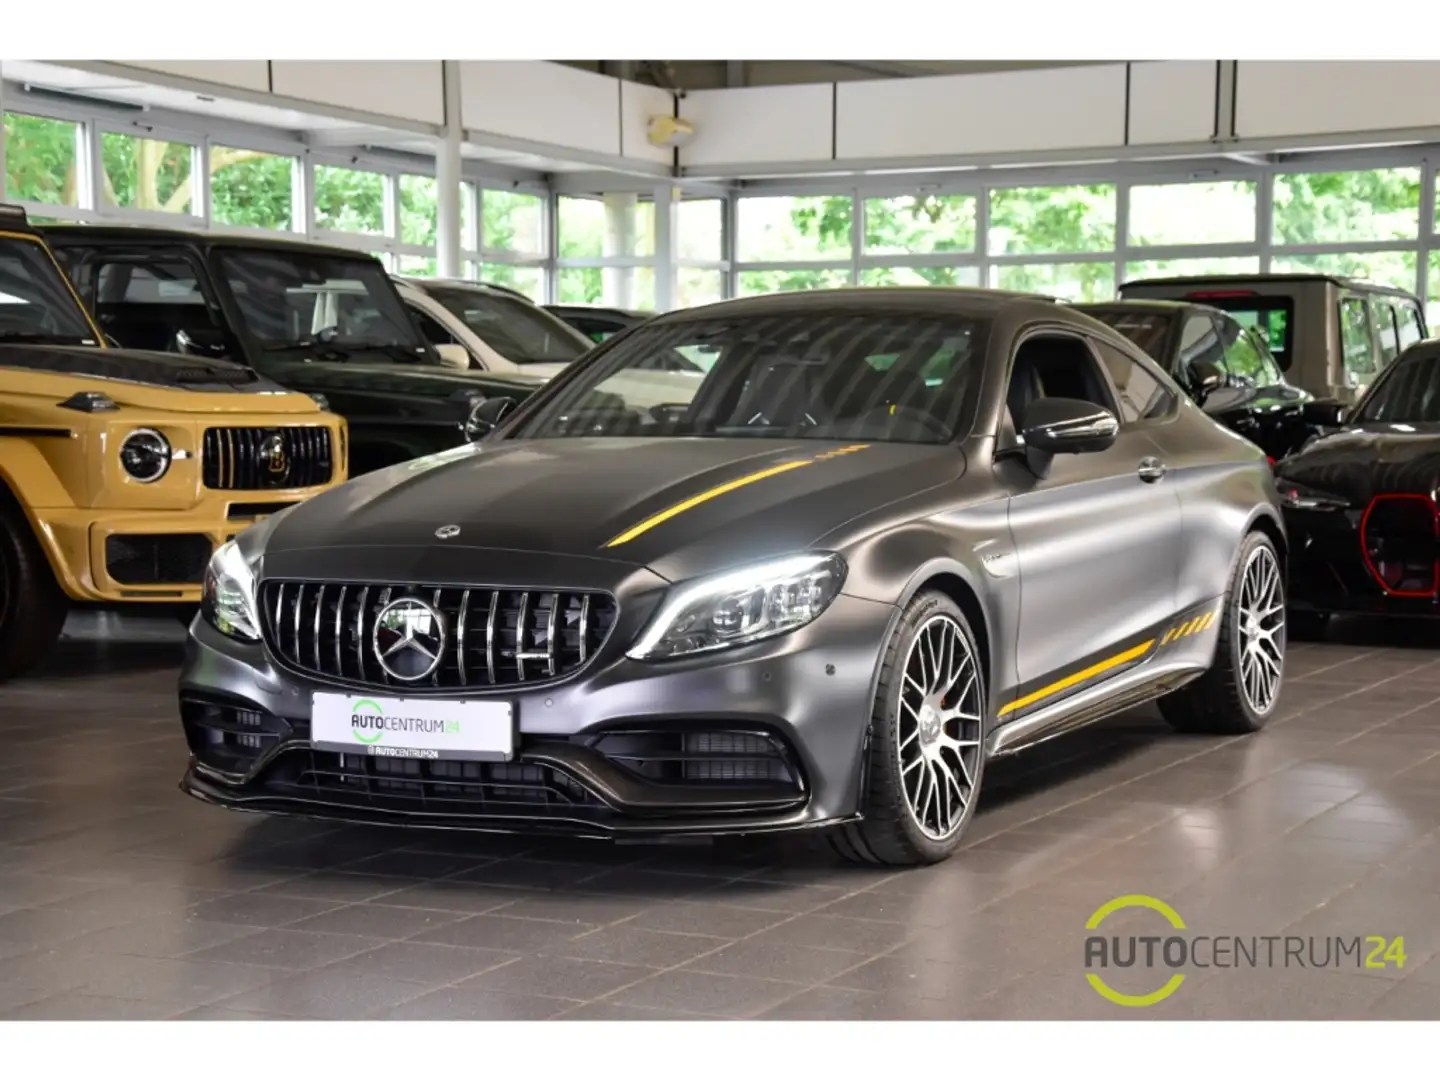 Mercedes-Benz C 63 AMG s FINAL EDITION - 1 of 499 Grey - 2